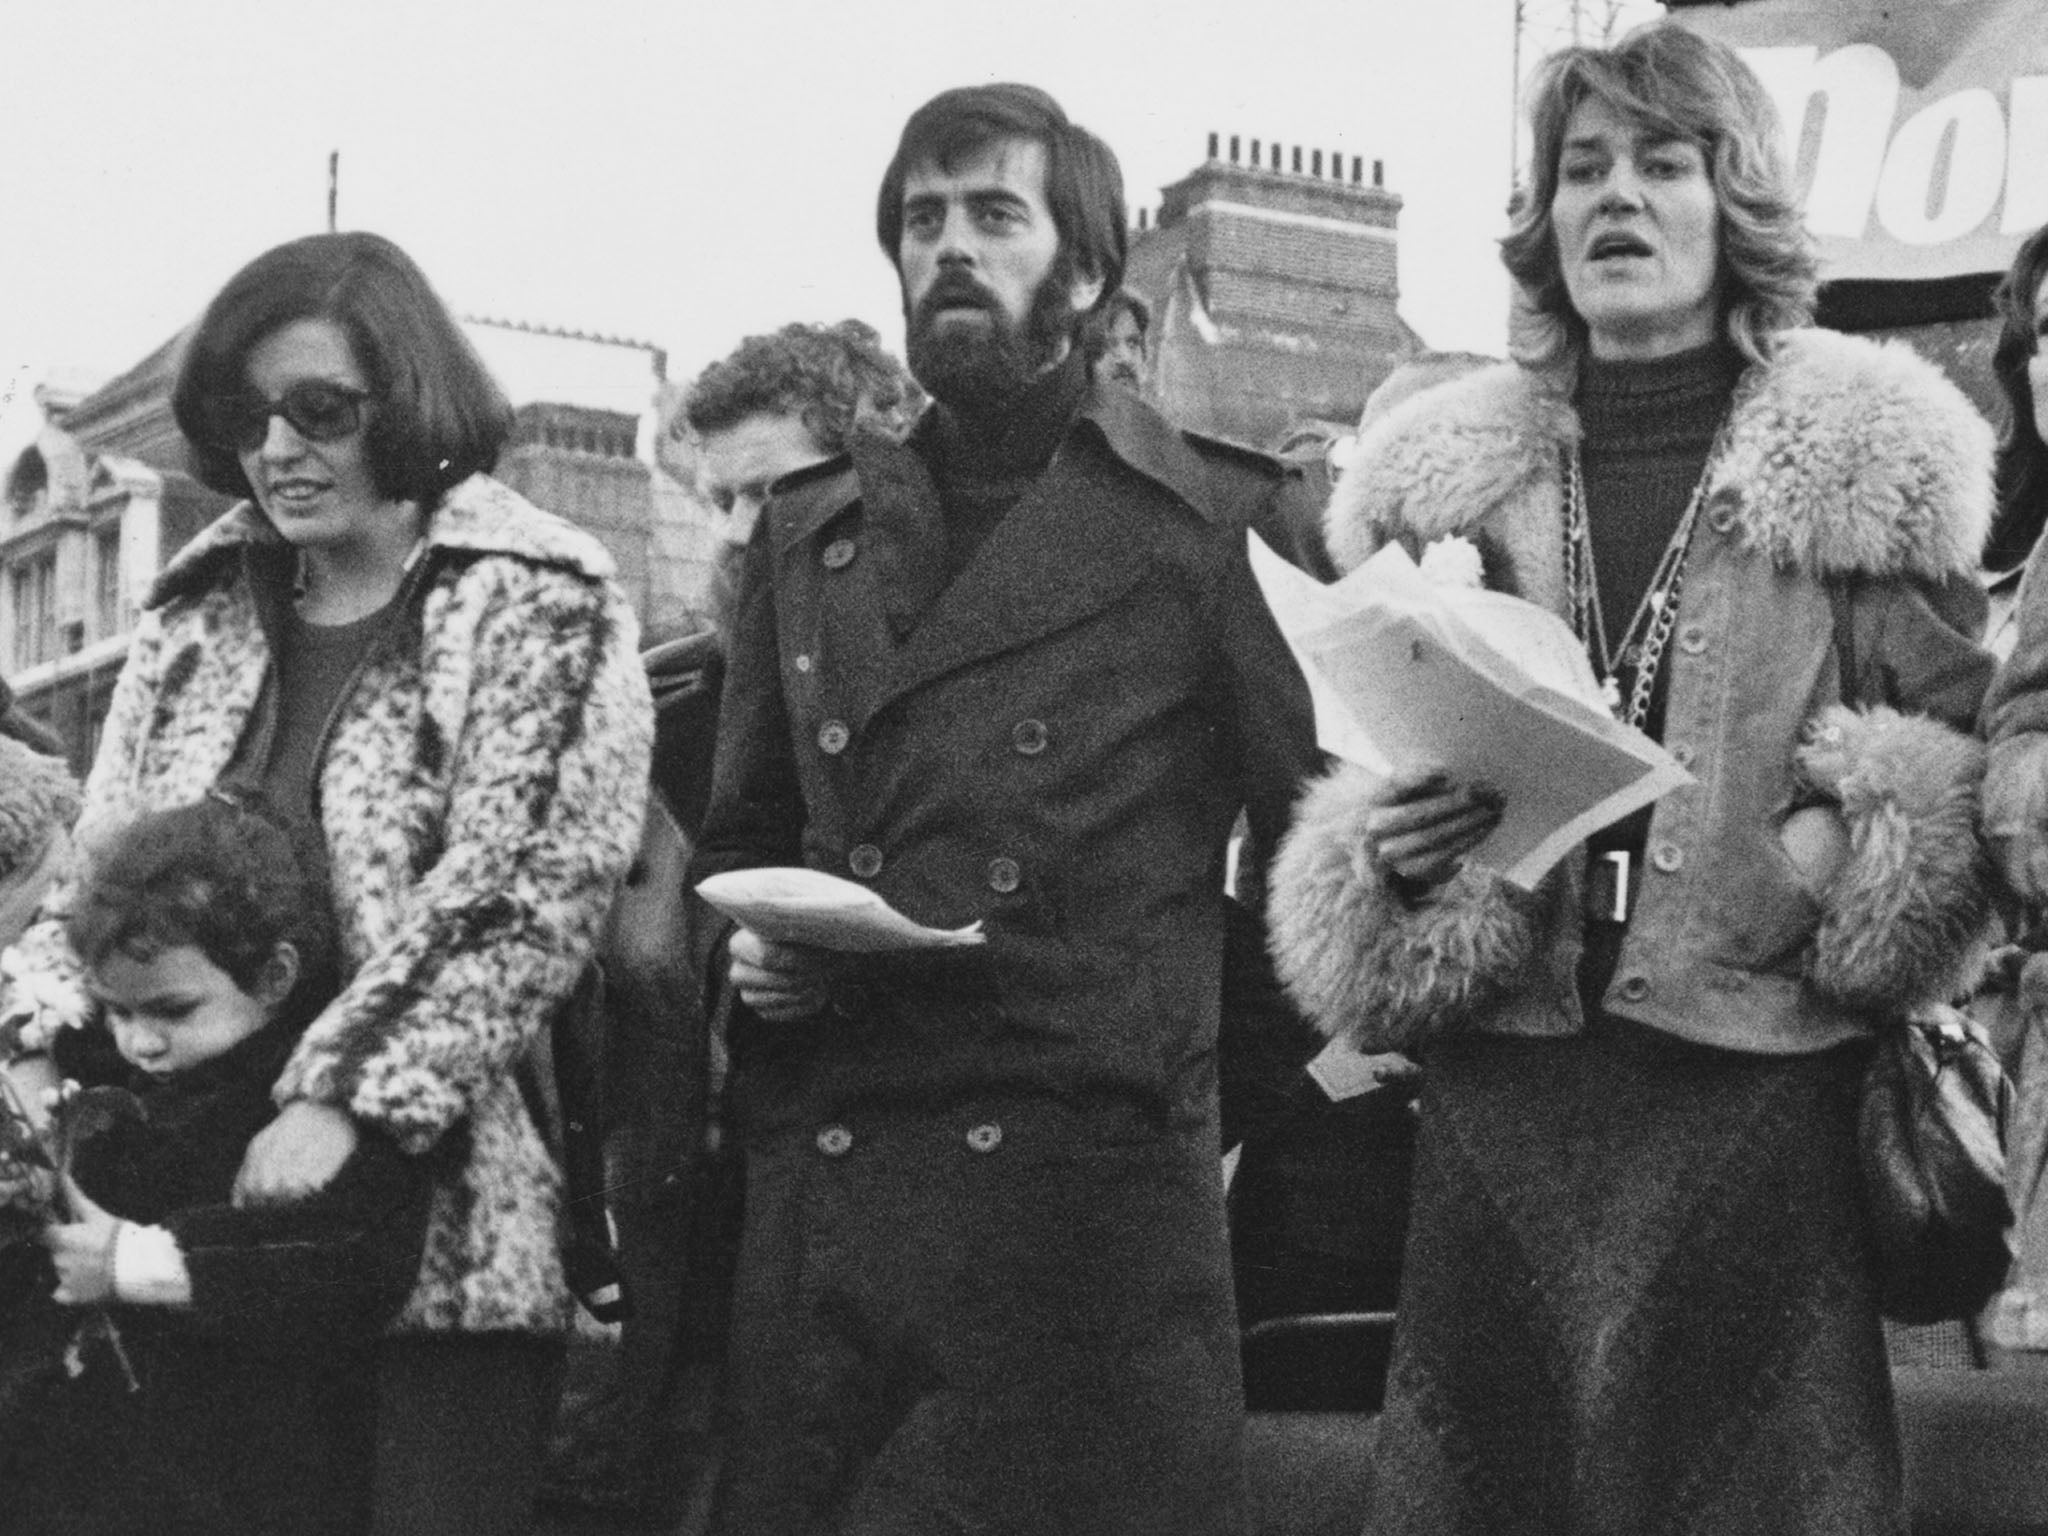 McKeown (centre) at the Ulster Peace Rally in Trafalgar Square, London, November 1976